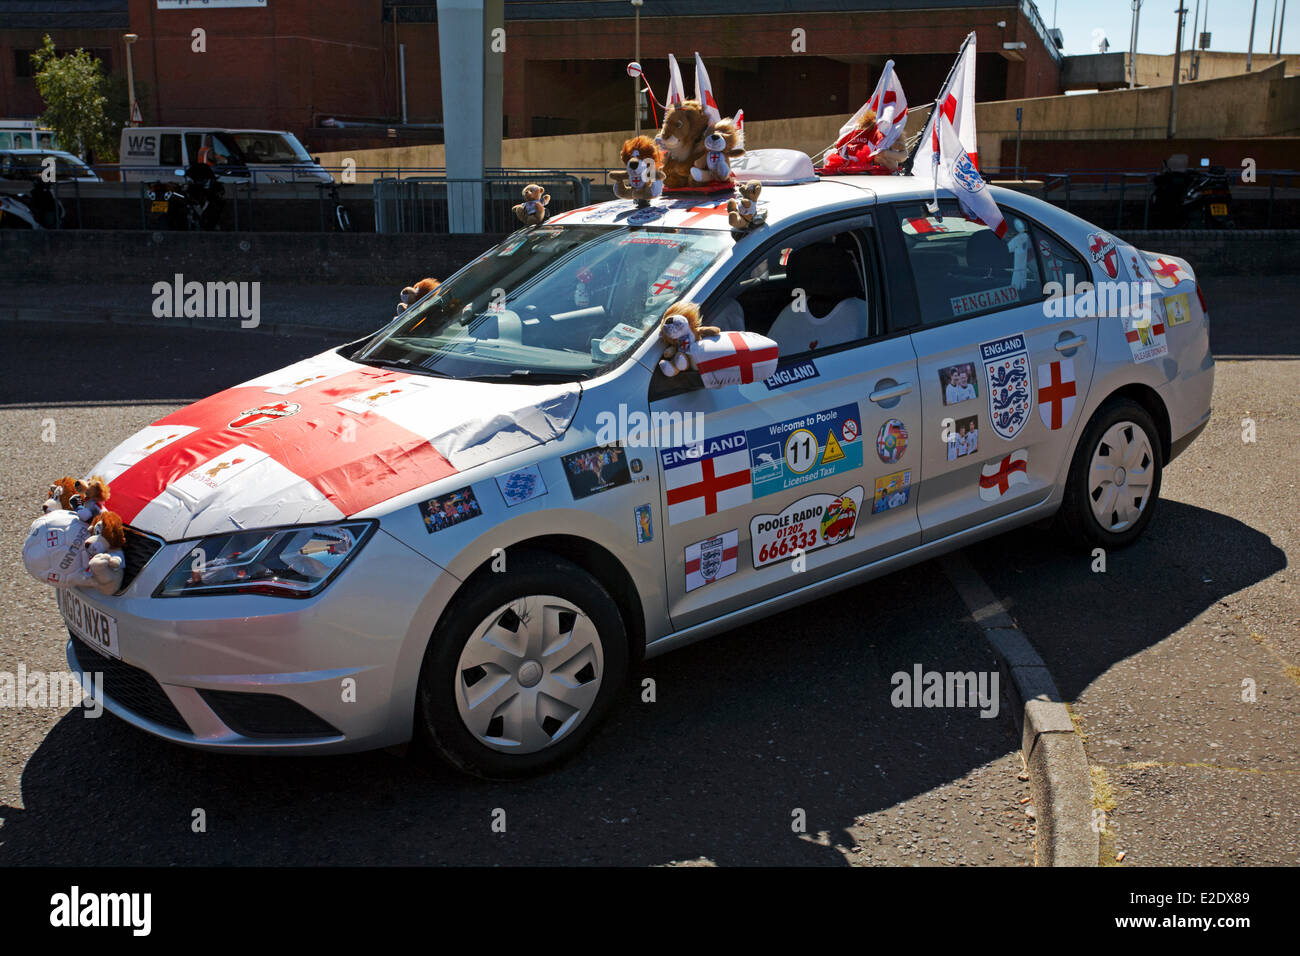 Dorset, UK. 19th June, 2014. World Cup decorated taxi Credit:  Carolyn Jenkins/Alamy Live News Stock Photo